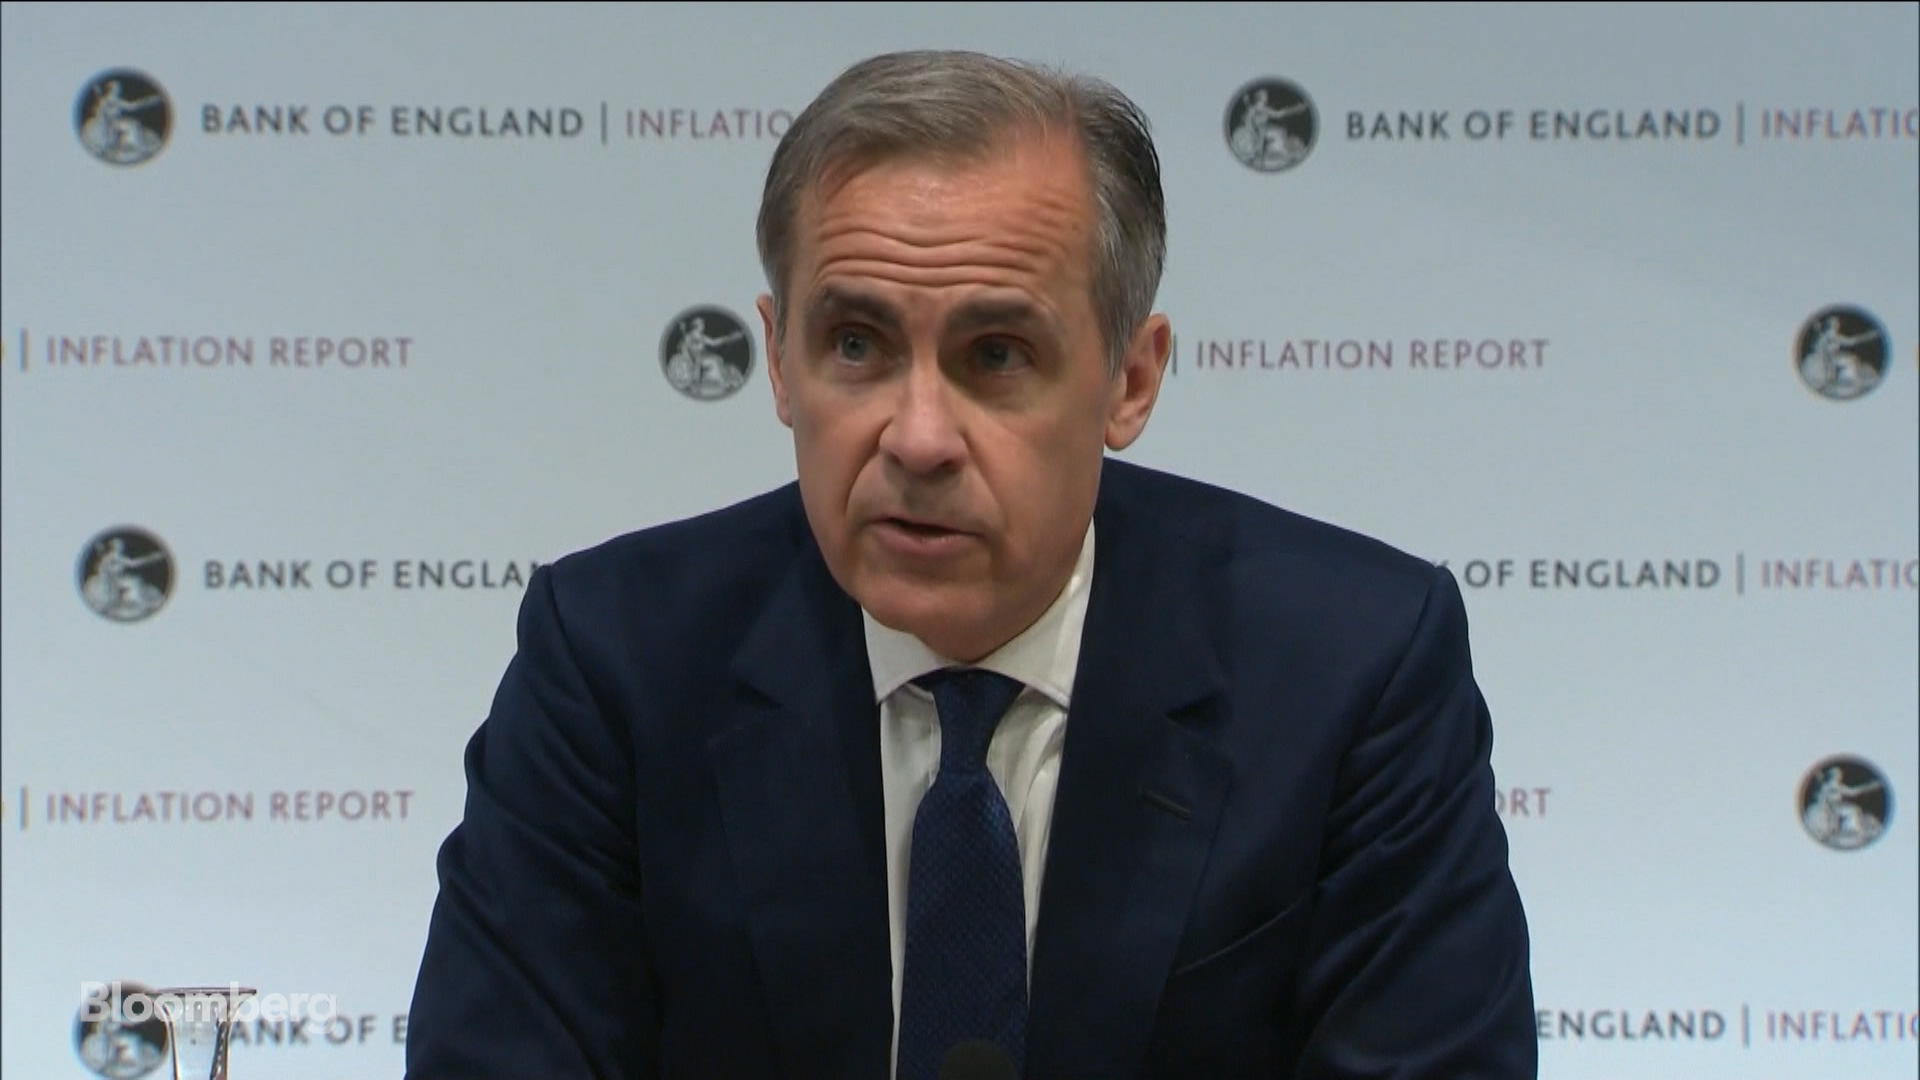 Exxxtrasmall Teens Big Dick - Carney Says Modest BOE Rate Hikes Needed Even as Inflation ...